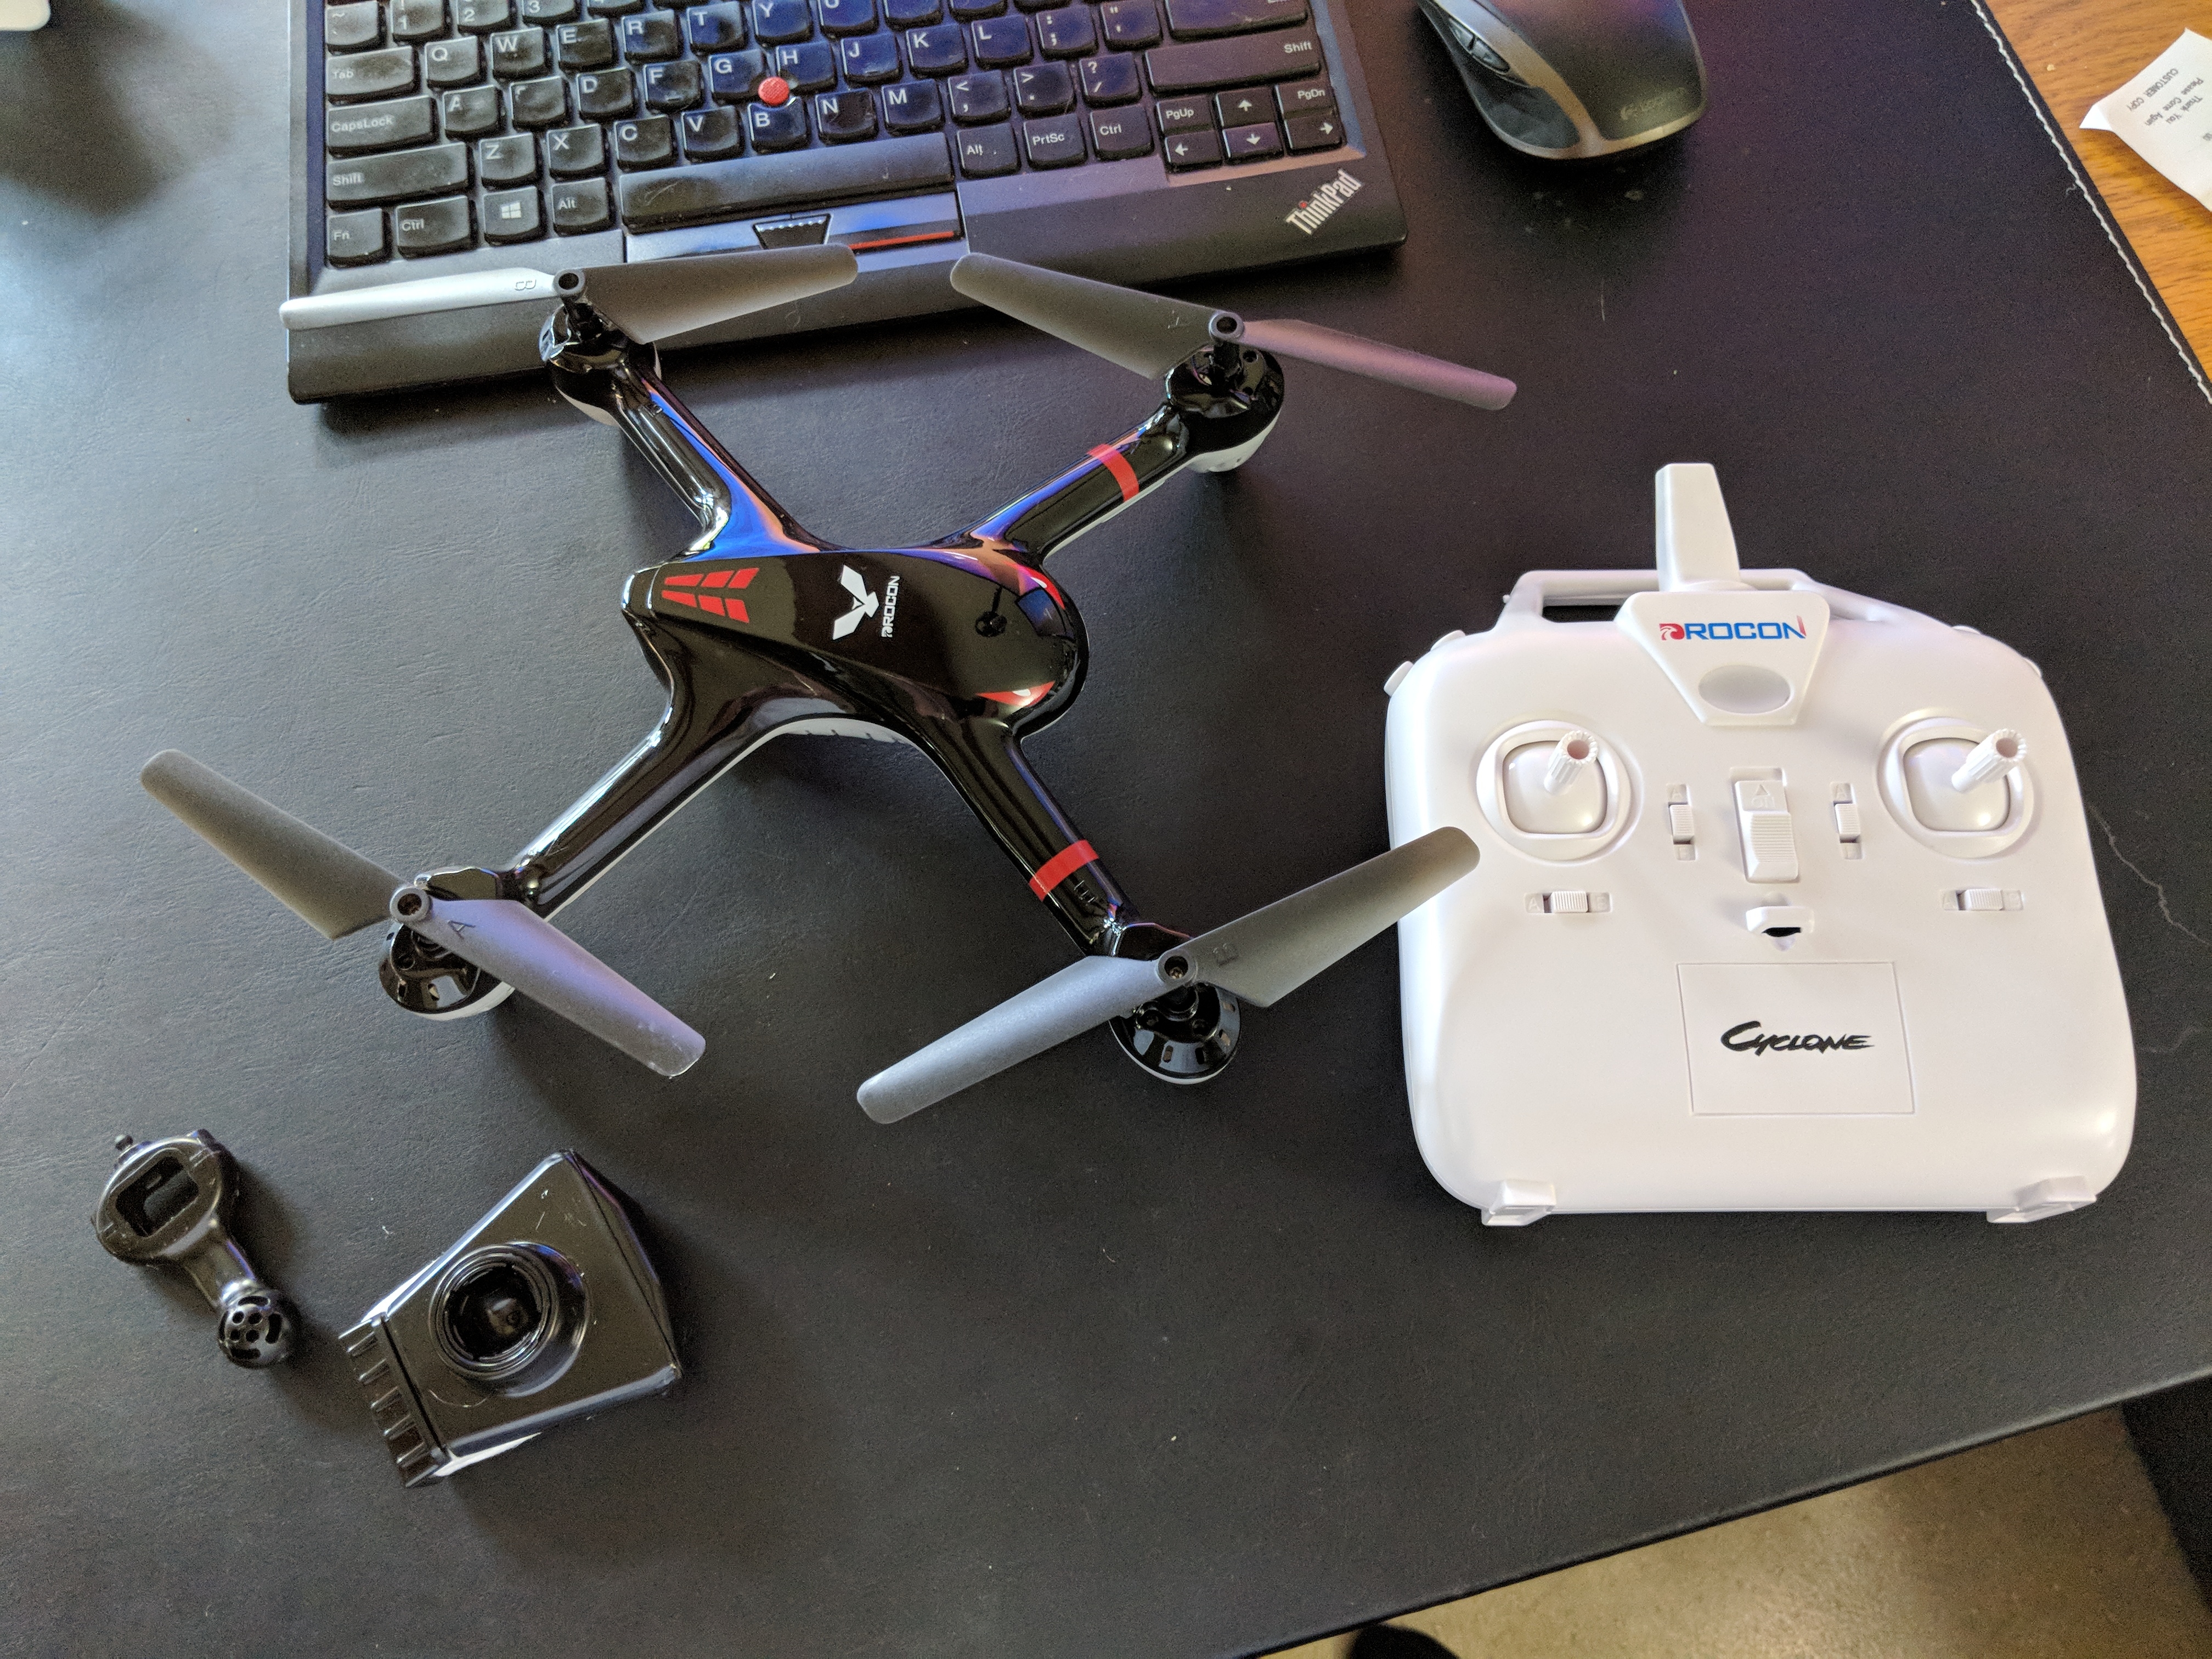 For $35 how could I go wrong? drone takes flight!